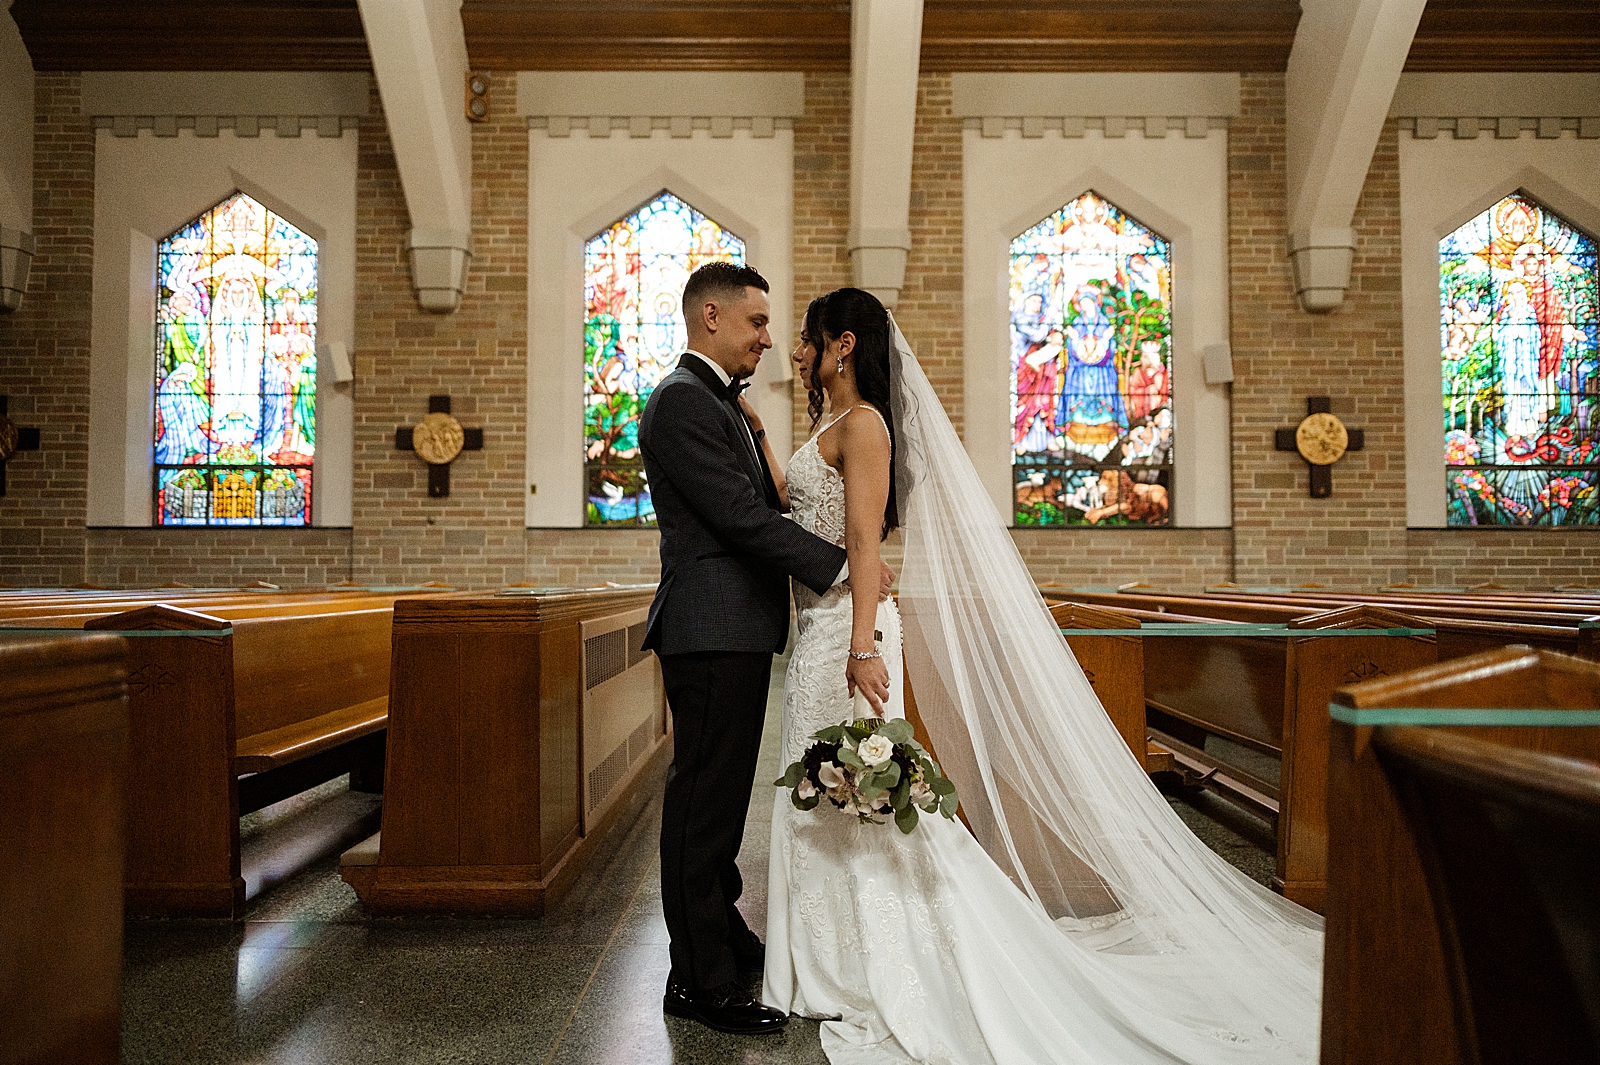 Groom holding Bride close to him in church sanctuary